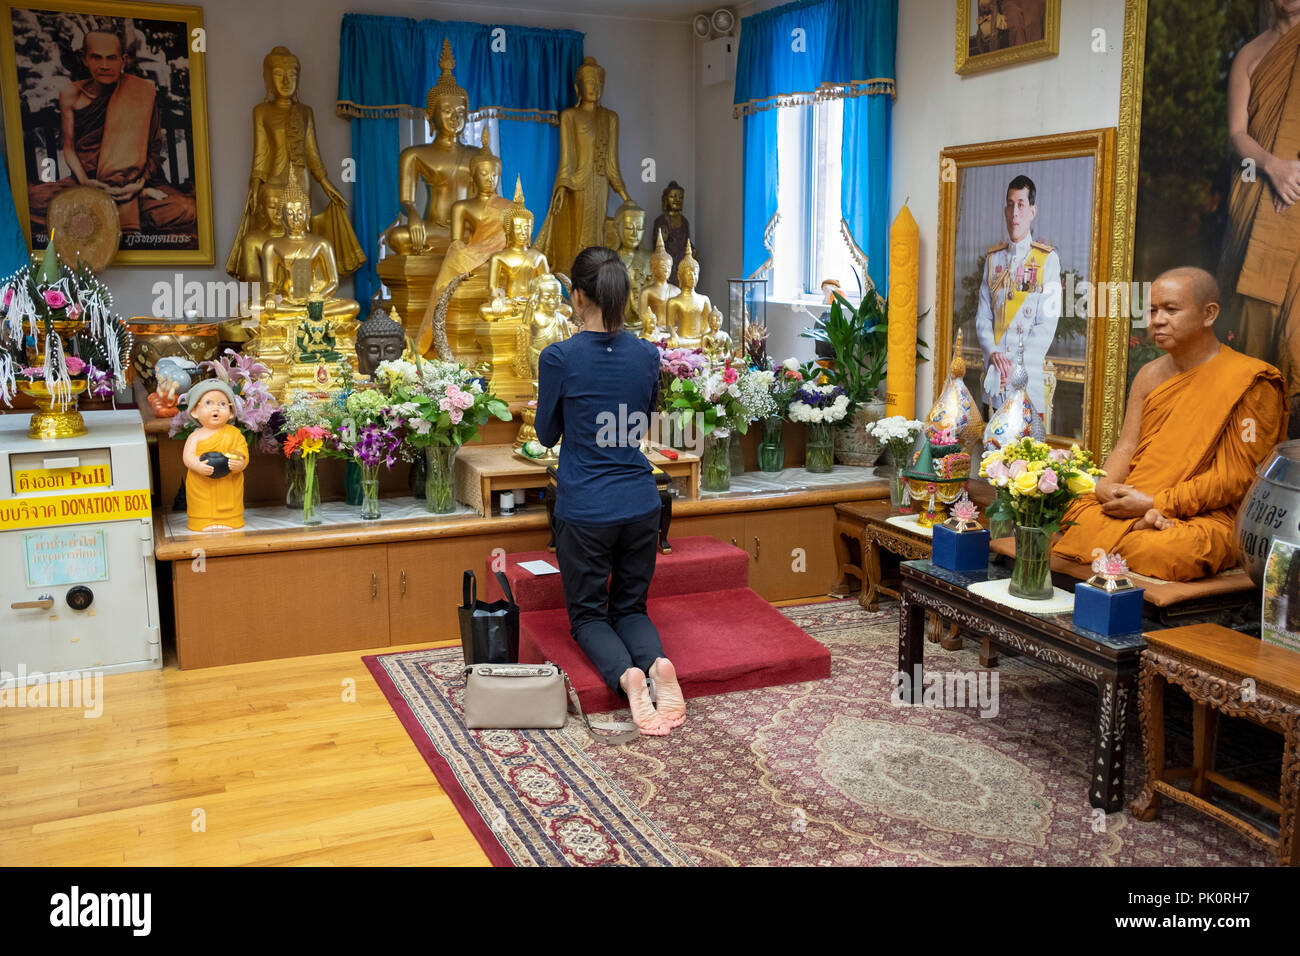 Unidentified woman worshipper kneeling in prayer & meditation in front of statues of Buddha at the Wat Buddah Thai Thavorn Vanaram in Elmhurst, Queens Stock Photo